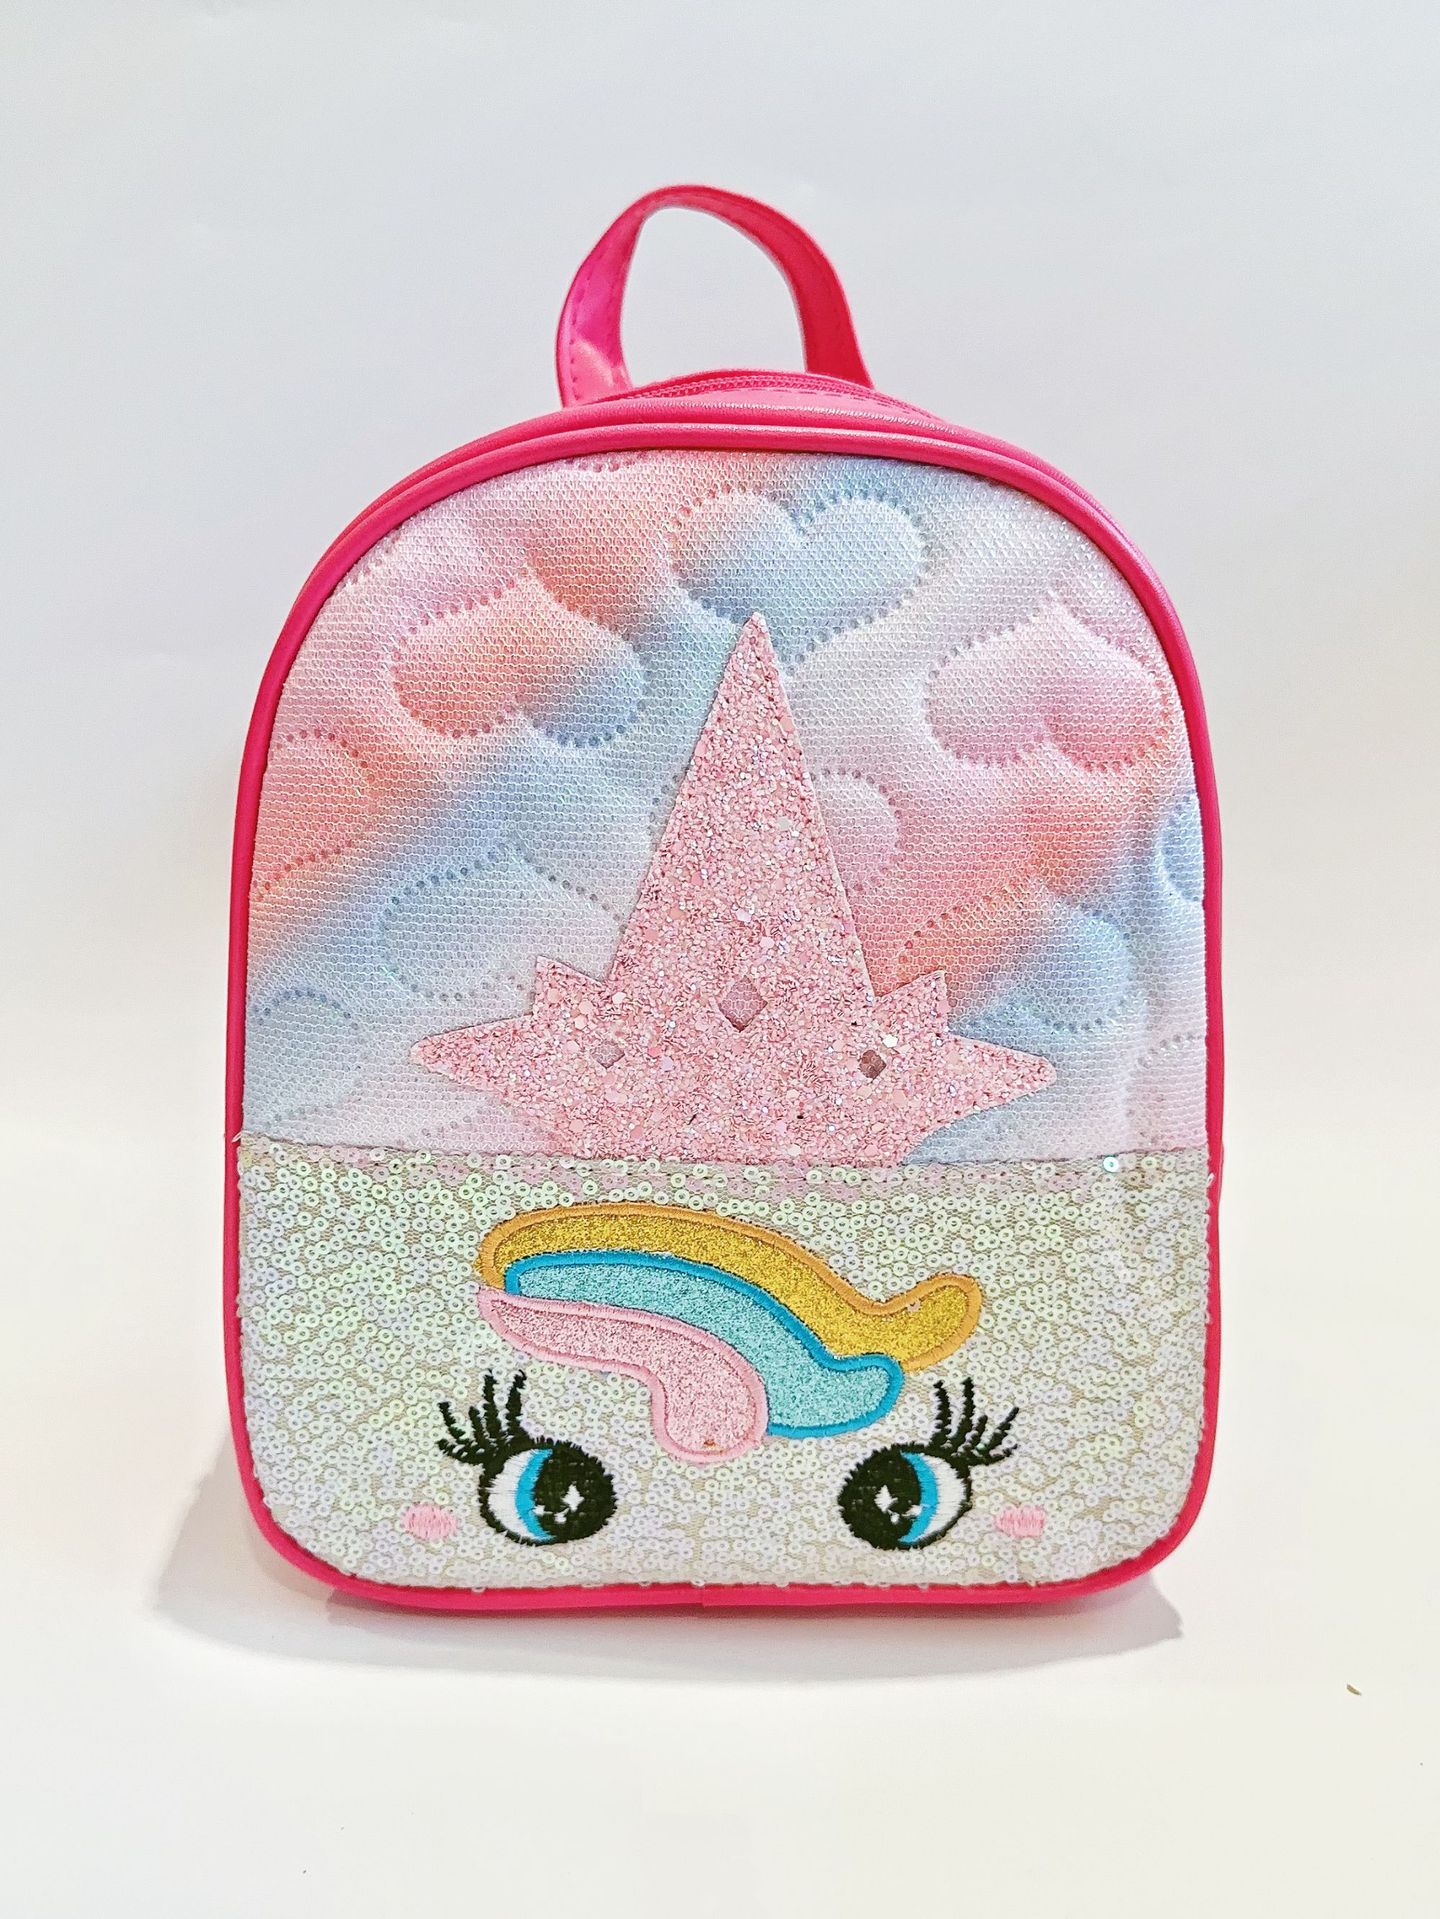 New Quilted Rainbow Unicorn Backpack Cute Casual Children's Small Schoolbag Girls' Fashion Cartoon Backpack